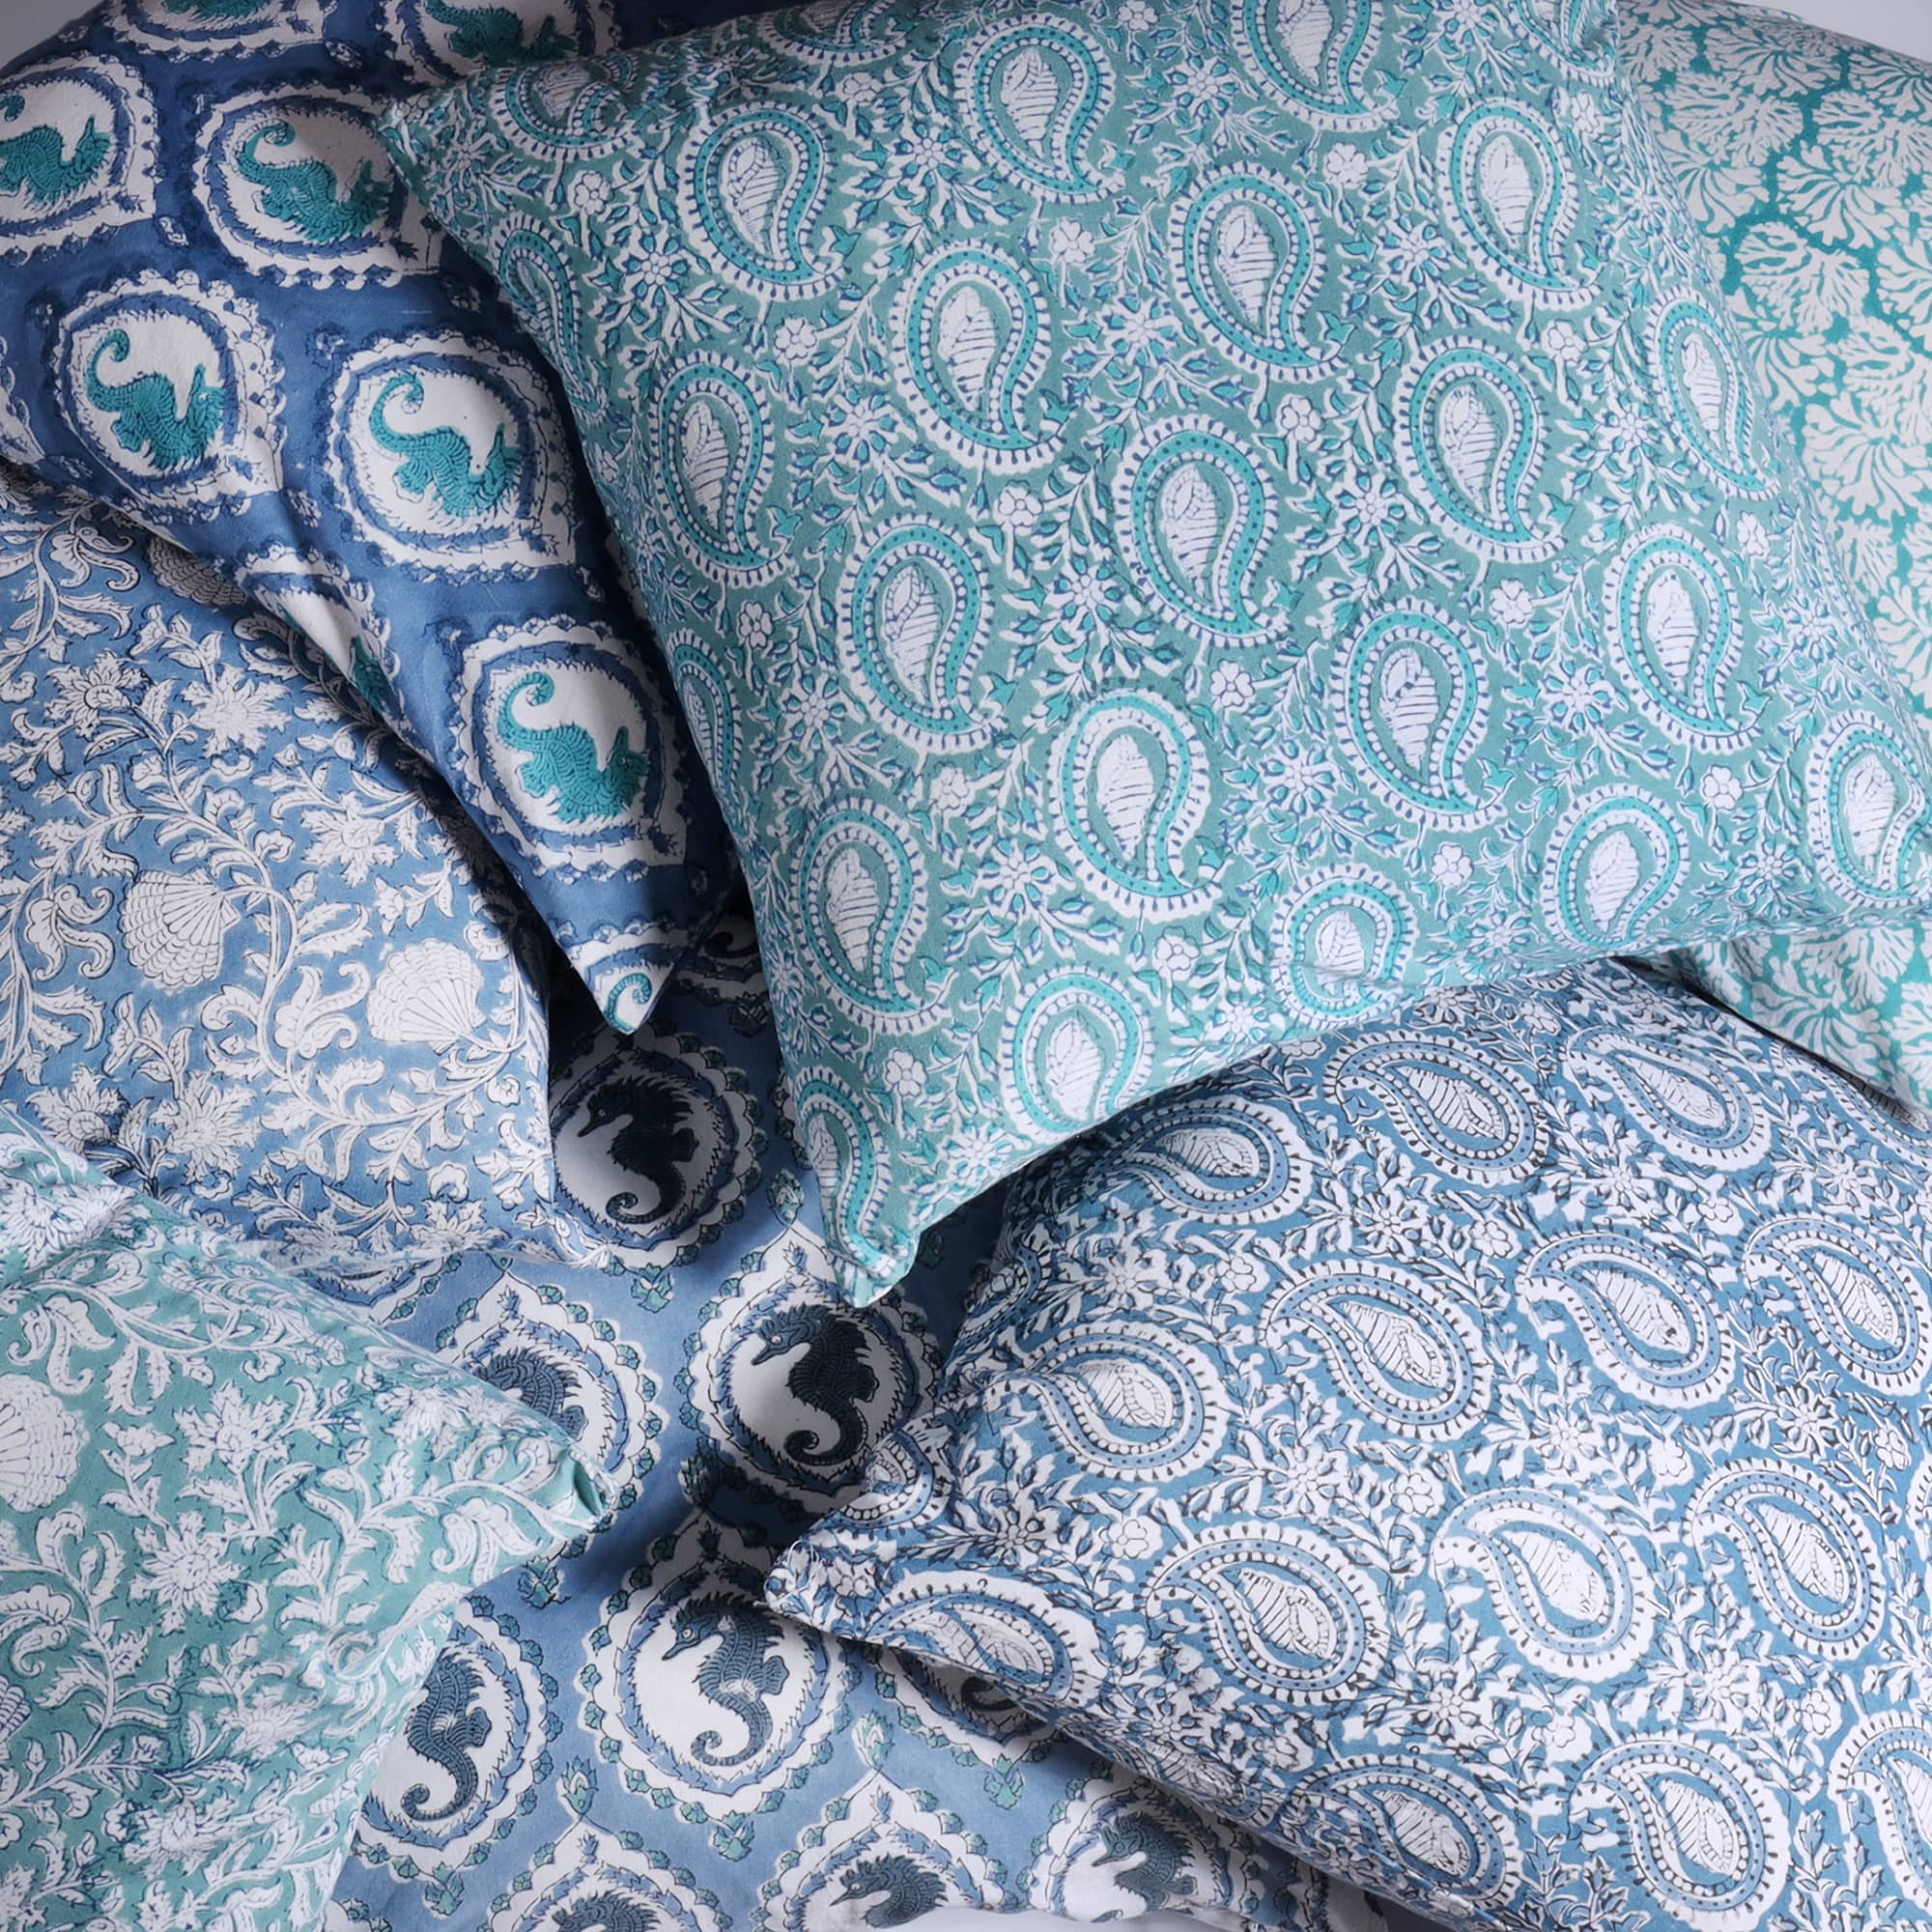 Ocean  Blue Seahorse Cameo cushion which is Hand block printed fabric on a pile of other Hand block printed cushions